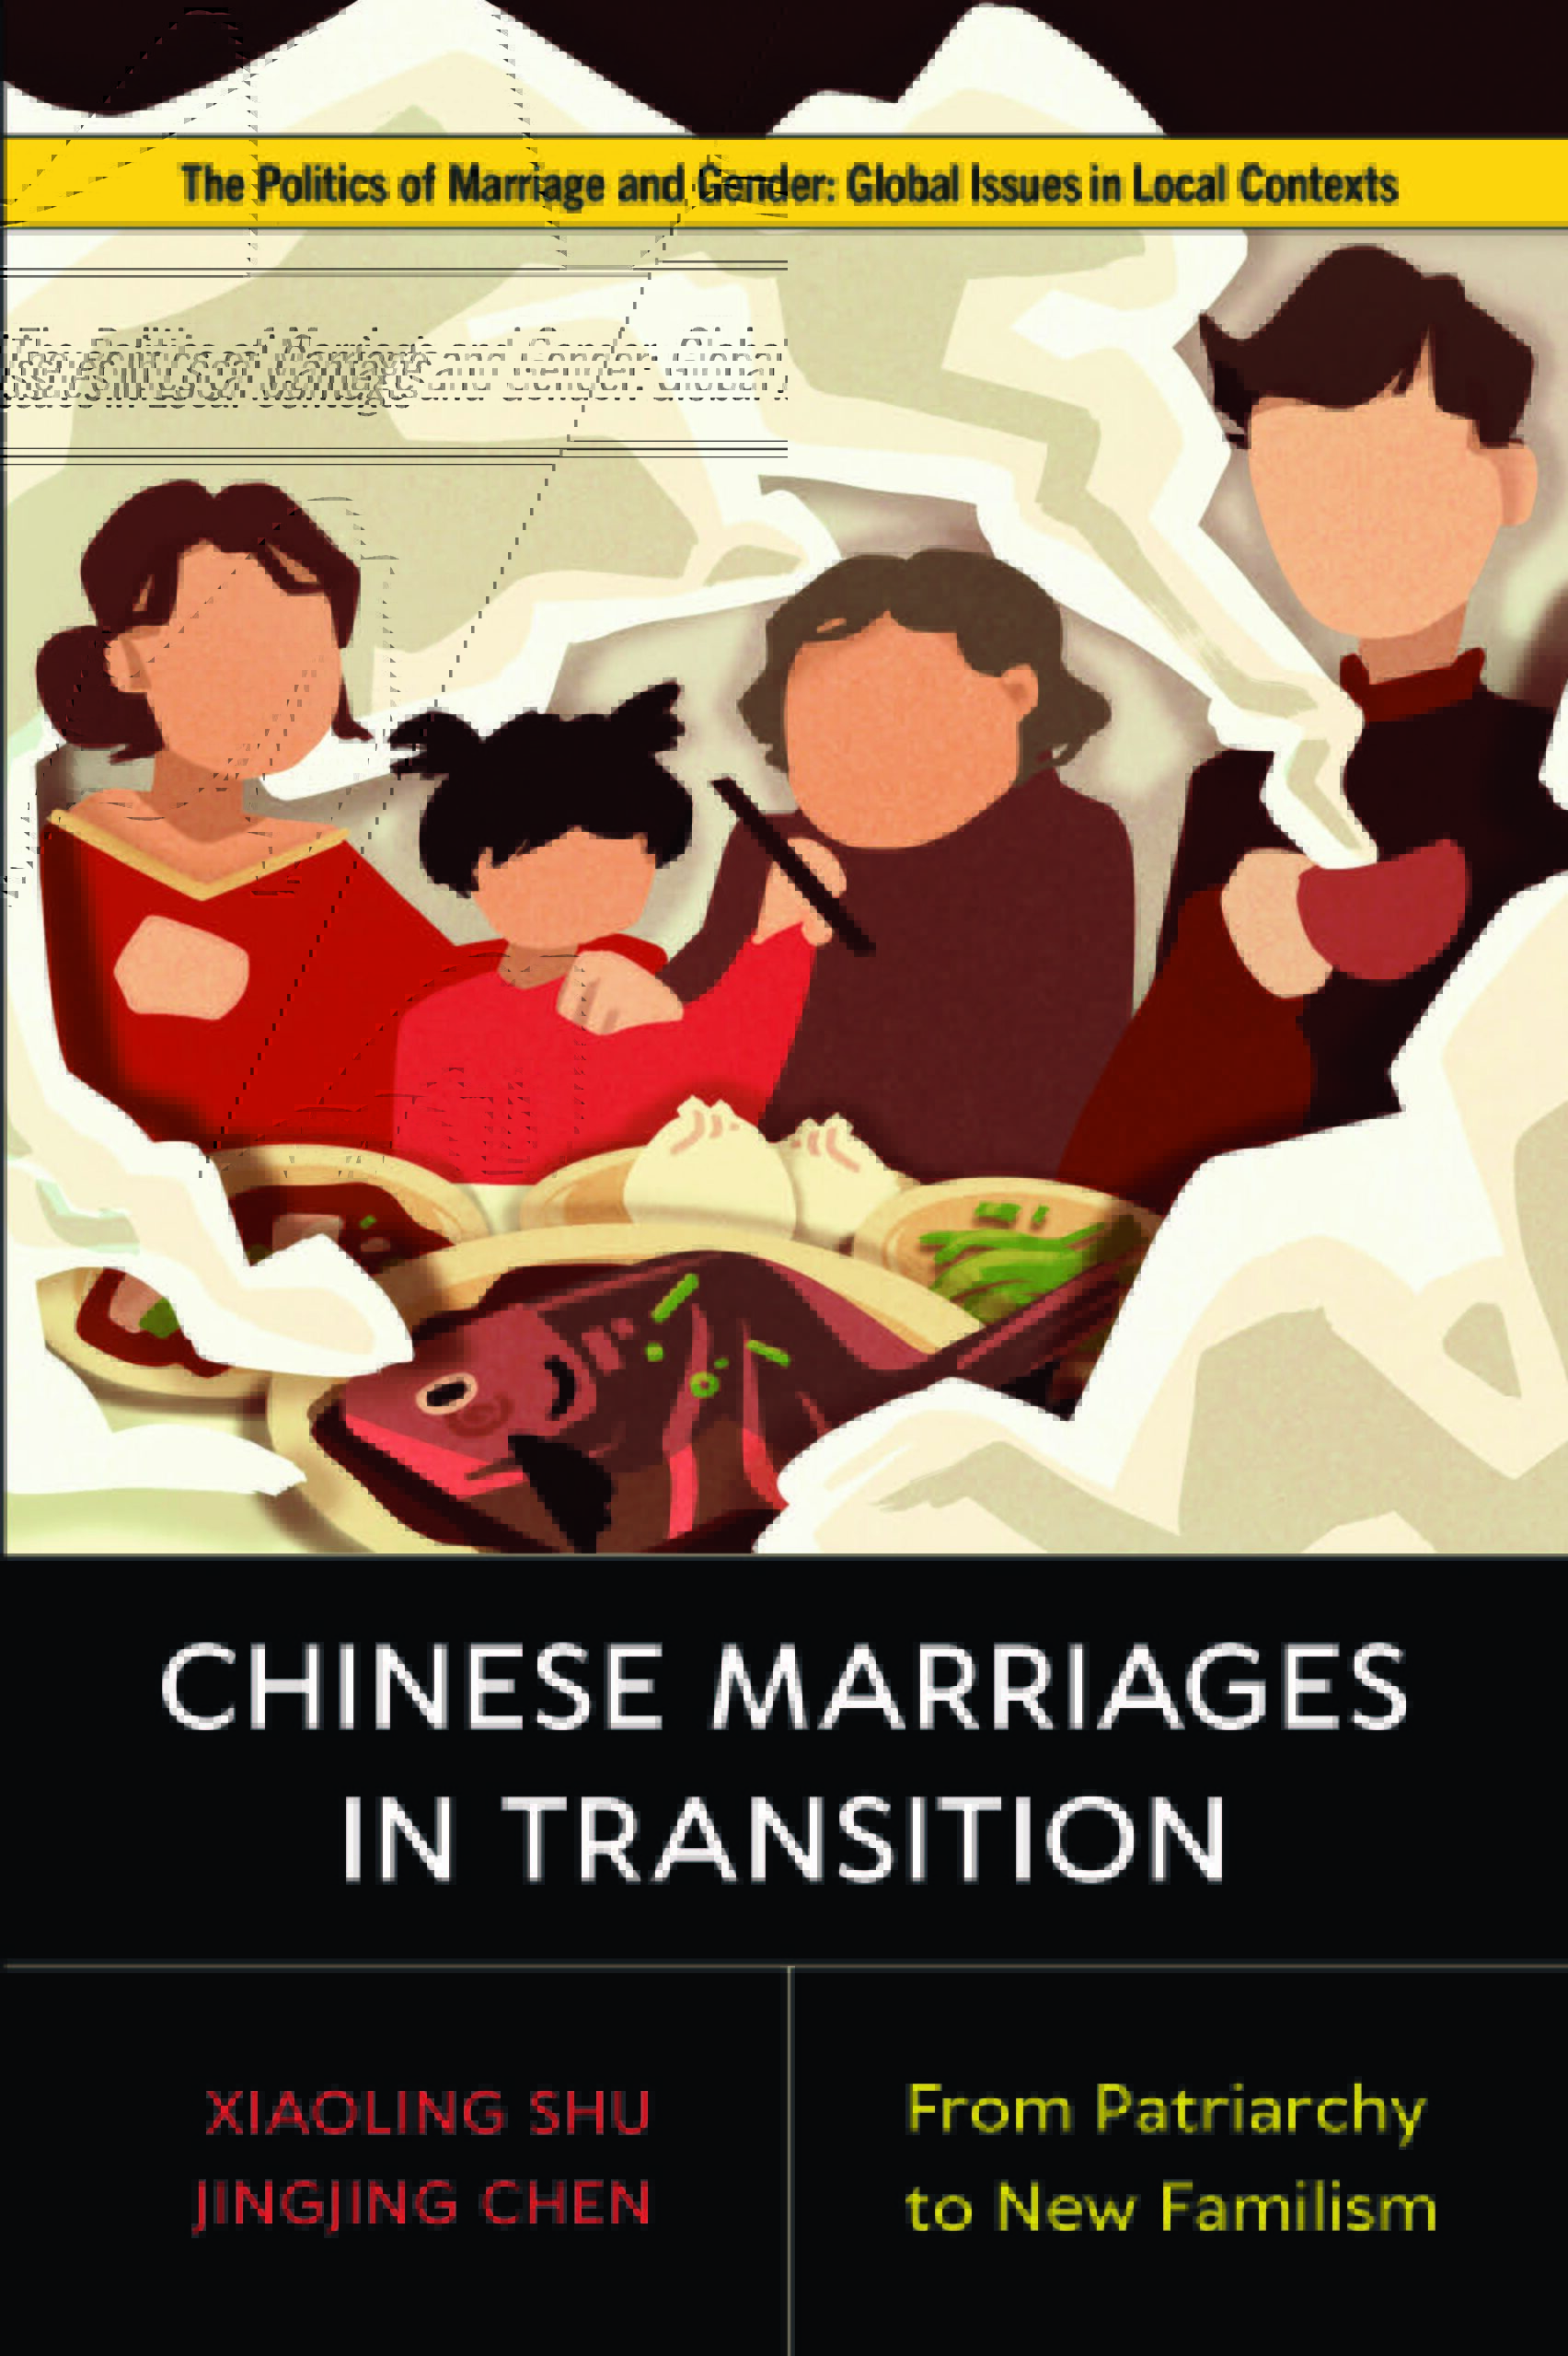 Book cover for "Chinese Marriages in Transition" by Xiaoling Shu and Jingjing Chen